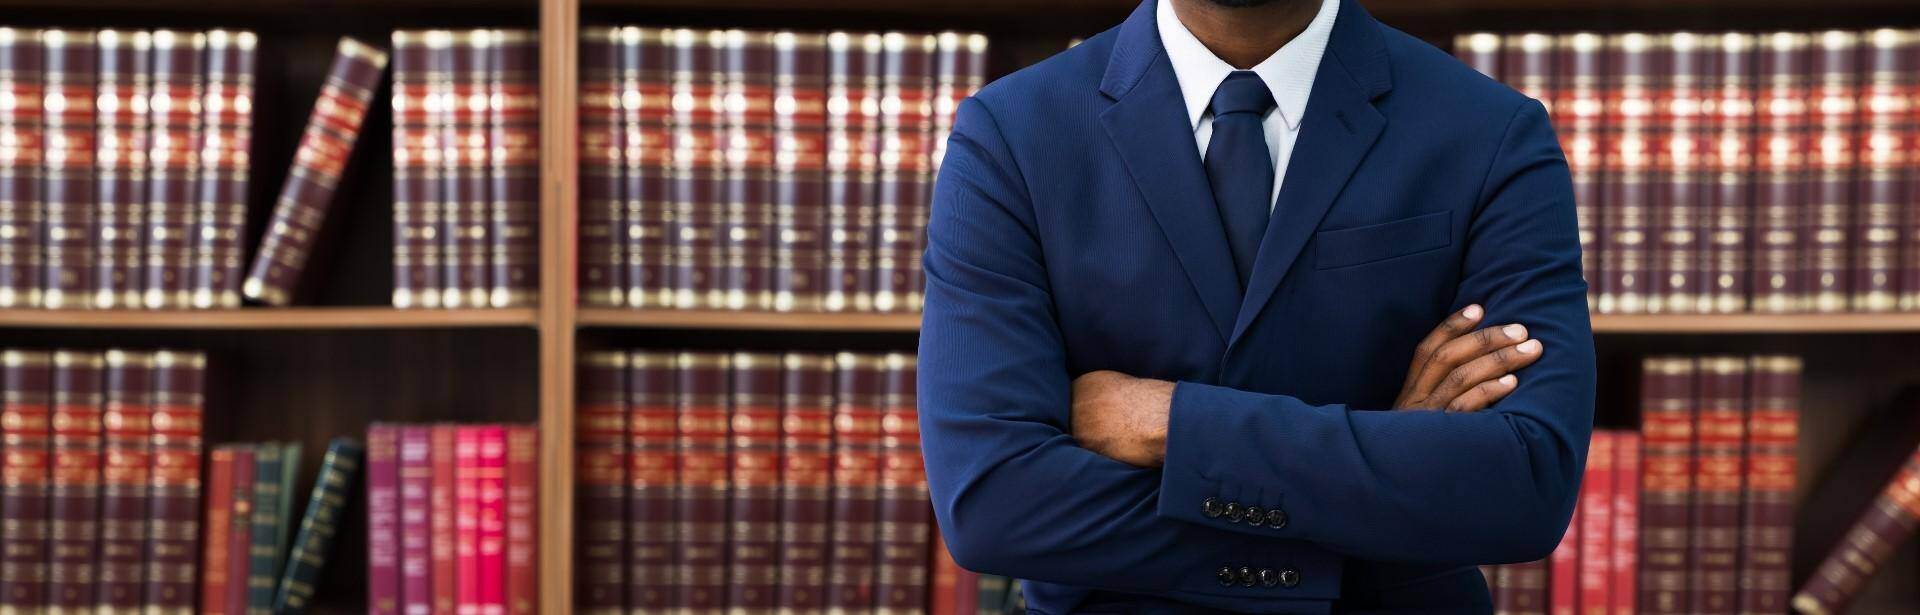 A black lawyer standing in front of a bookshelf of law book in Dalton, Georgia